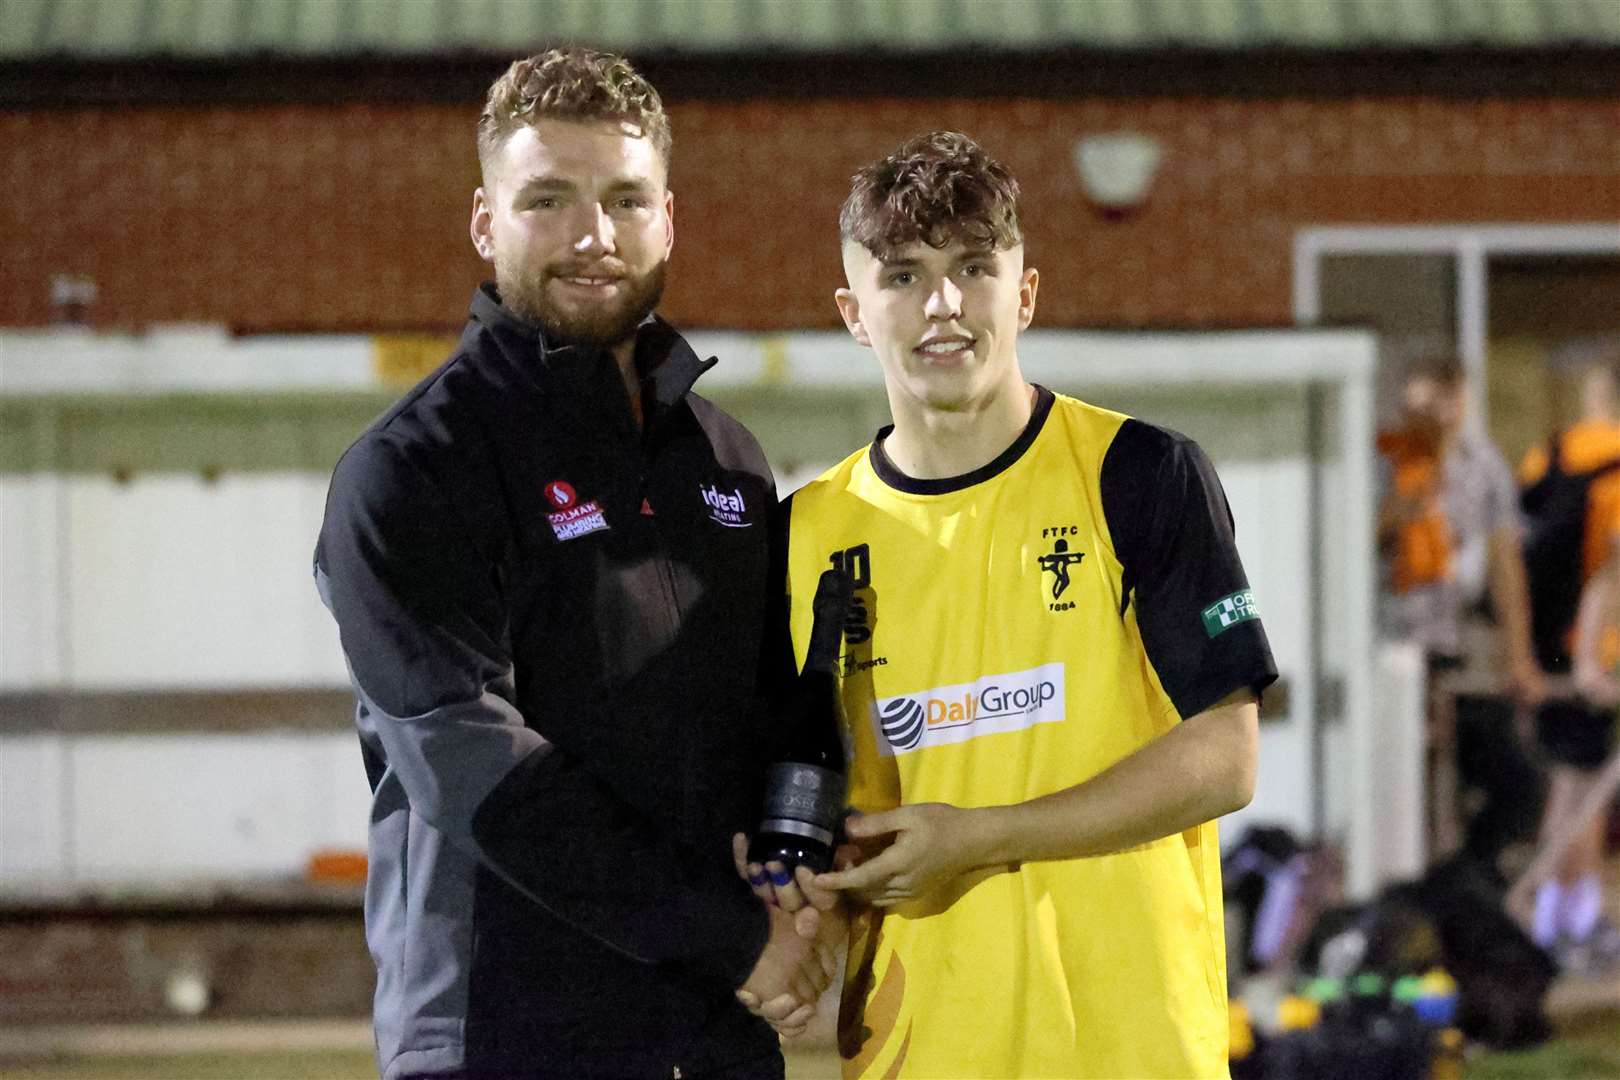 Man of the Match Finn Whiteley, sponsored by Colman's Plumbing and Heating. Picture: Ronnie Heyhoe